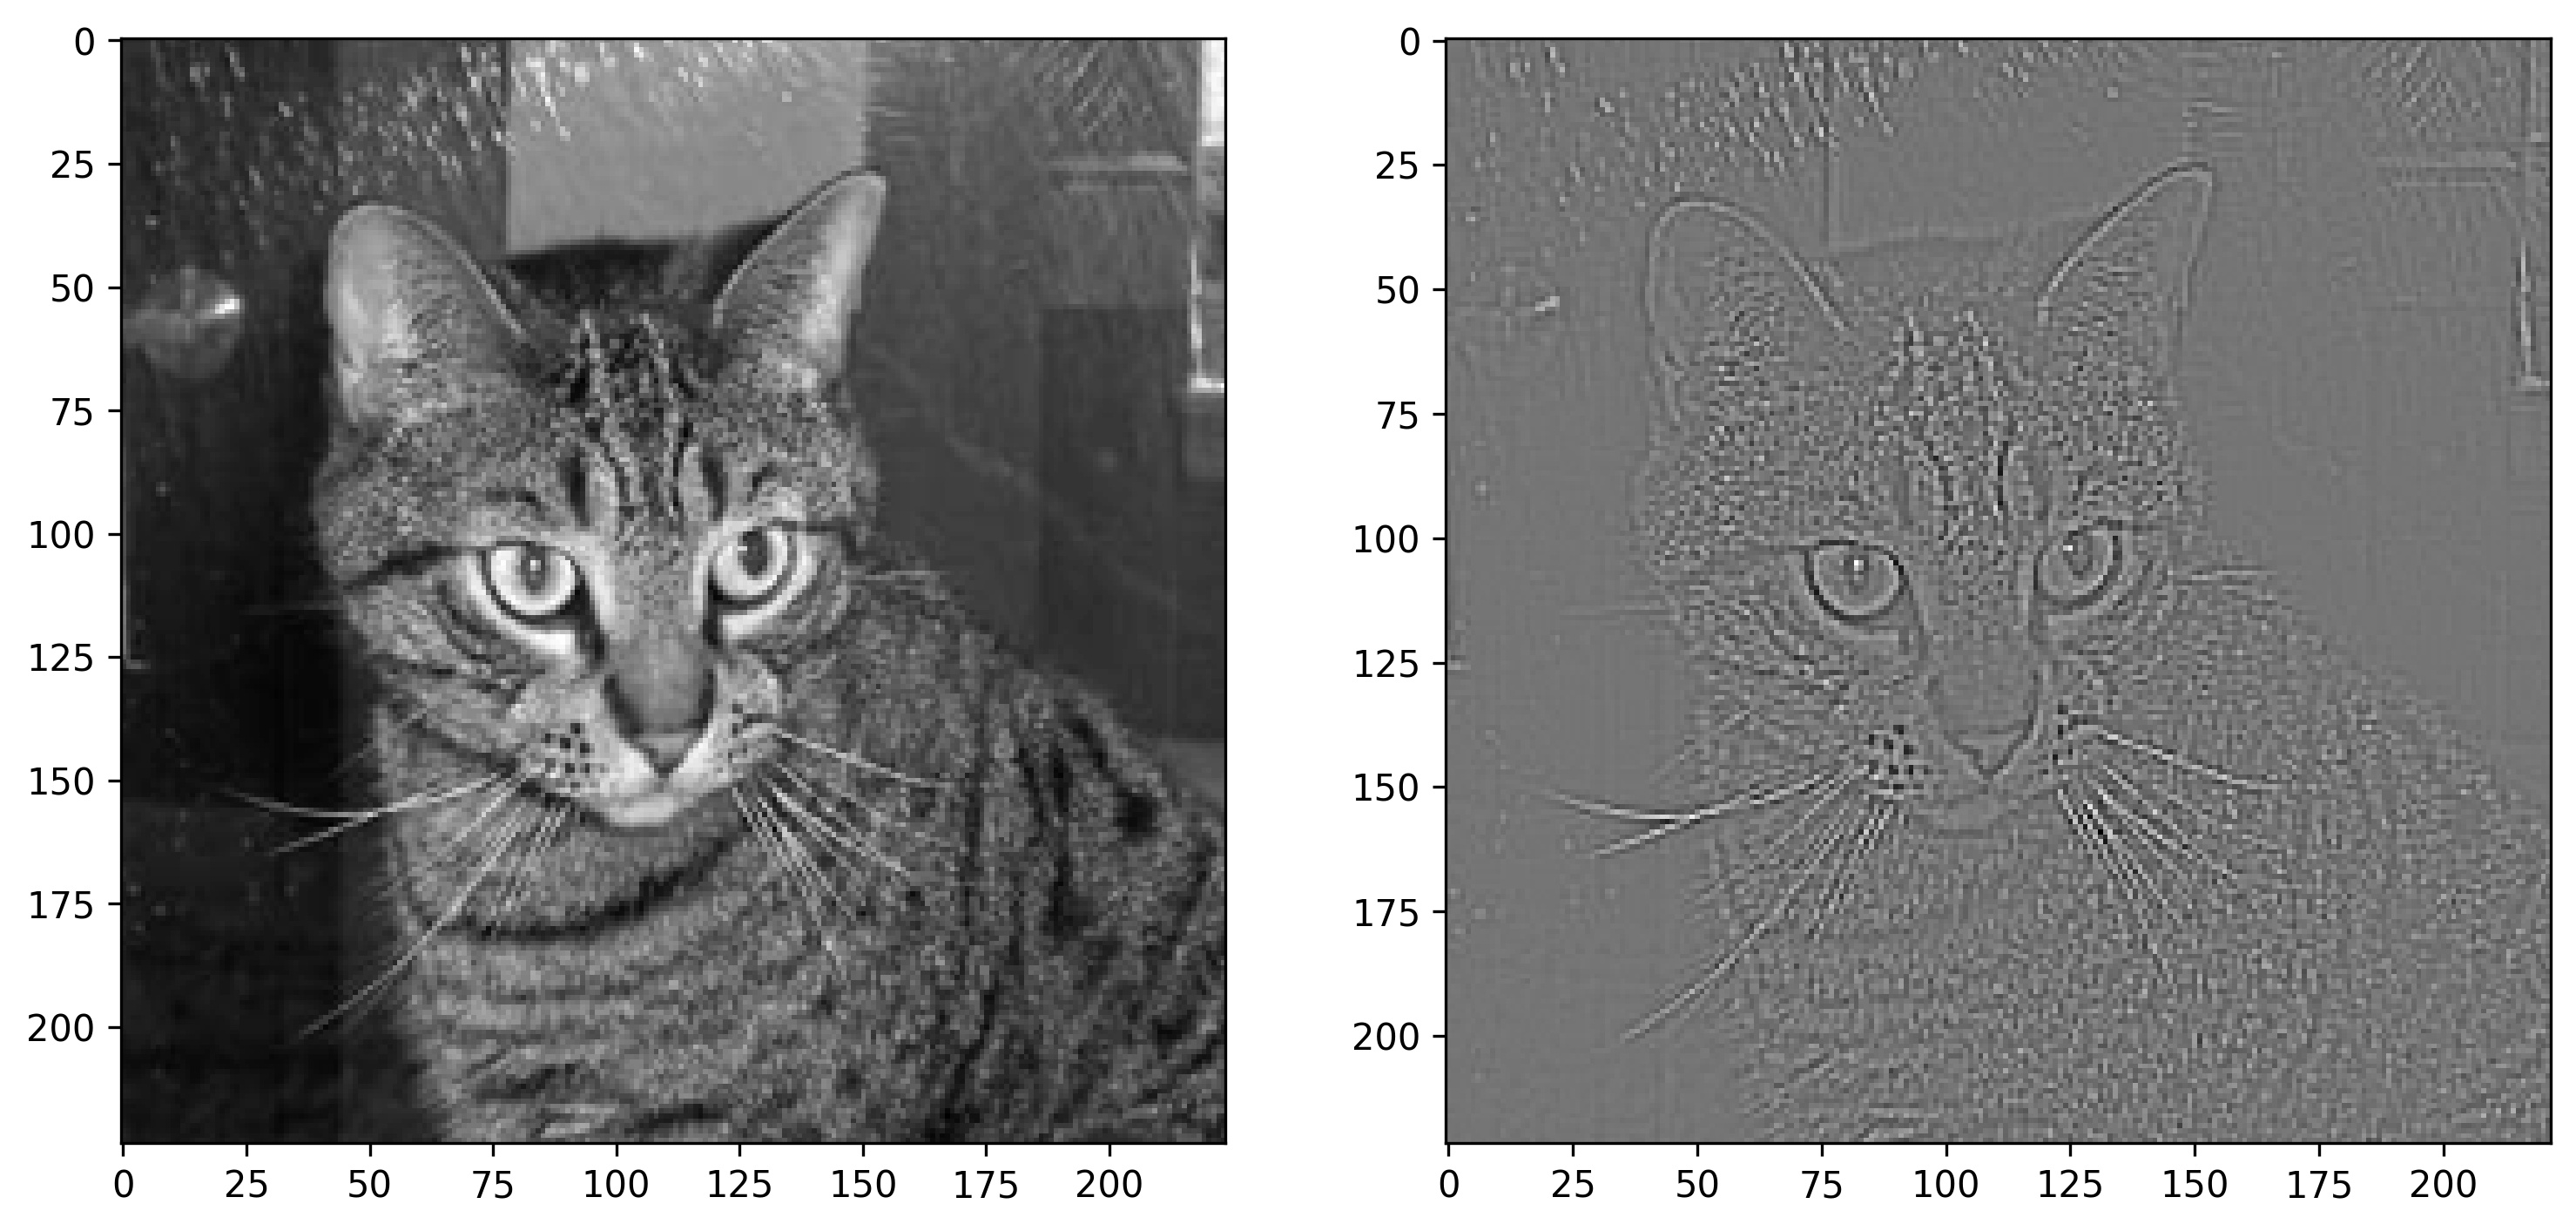 Image 11 — Cat image before and after outlining (image by author)